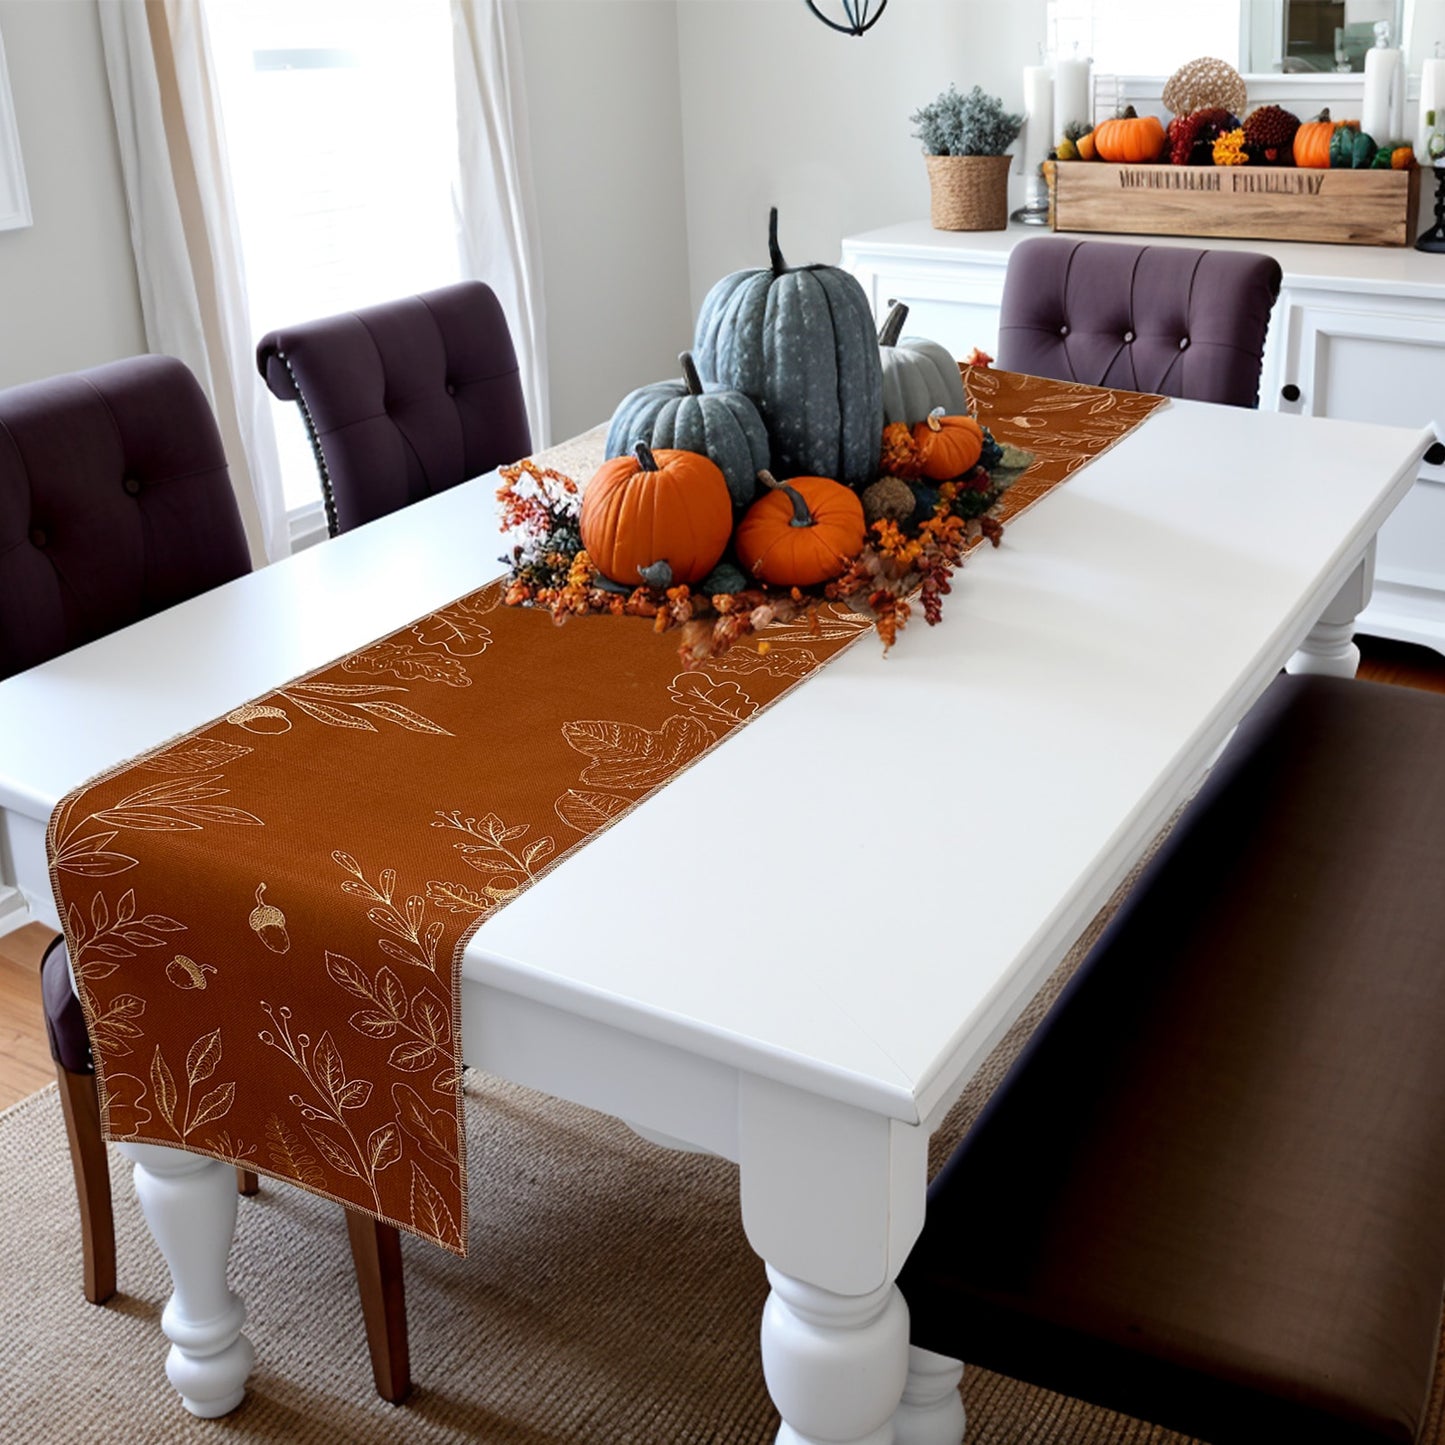 Family Gatherings Fall Thanksgiving Table Runner | 13x72 Inches Rustic Burlap Style | Seasonal Harvest Decor for Farmhouse Feasts